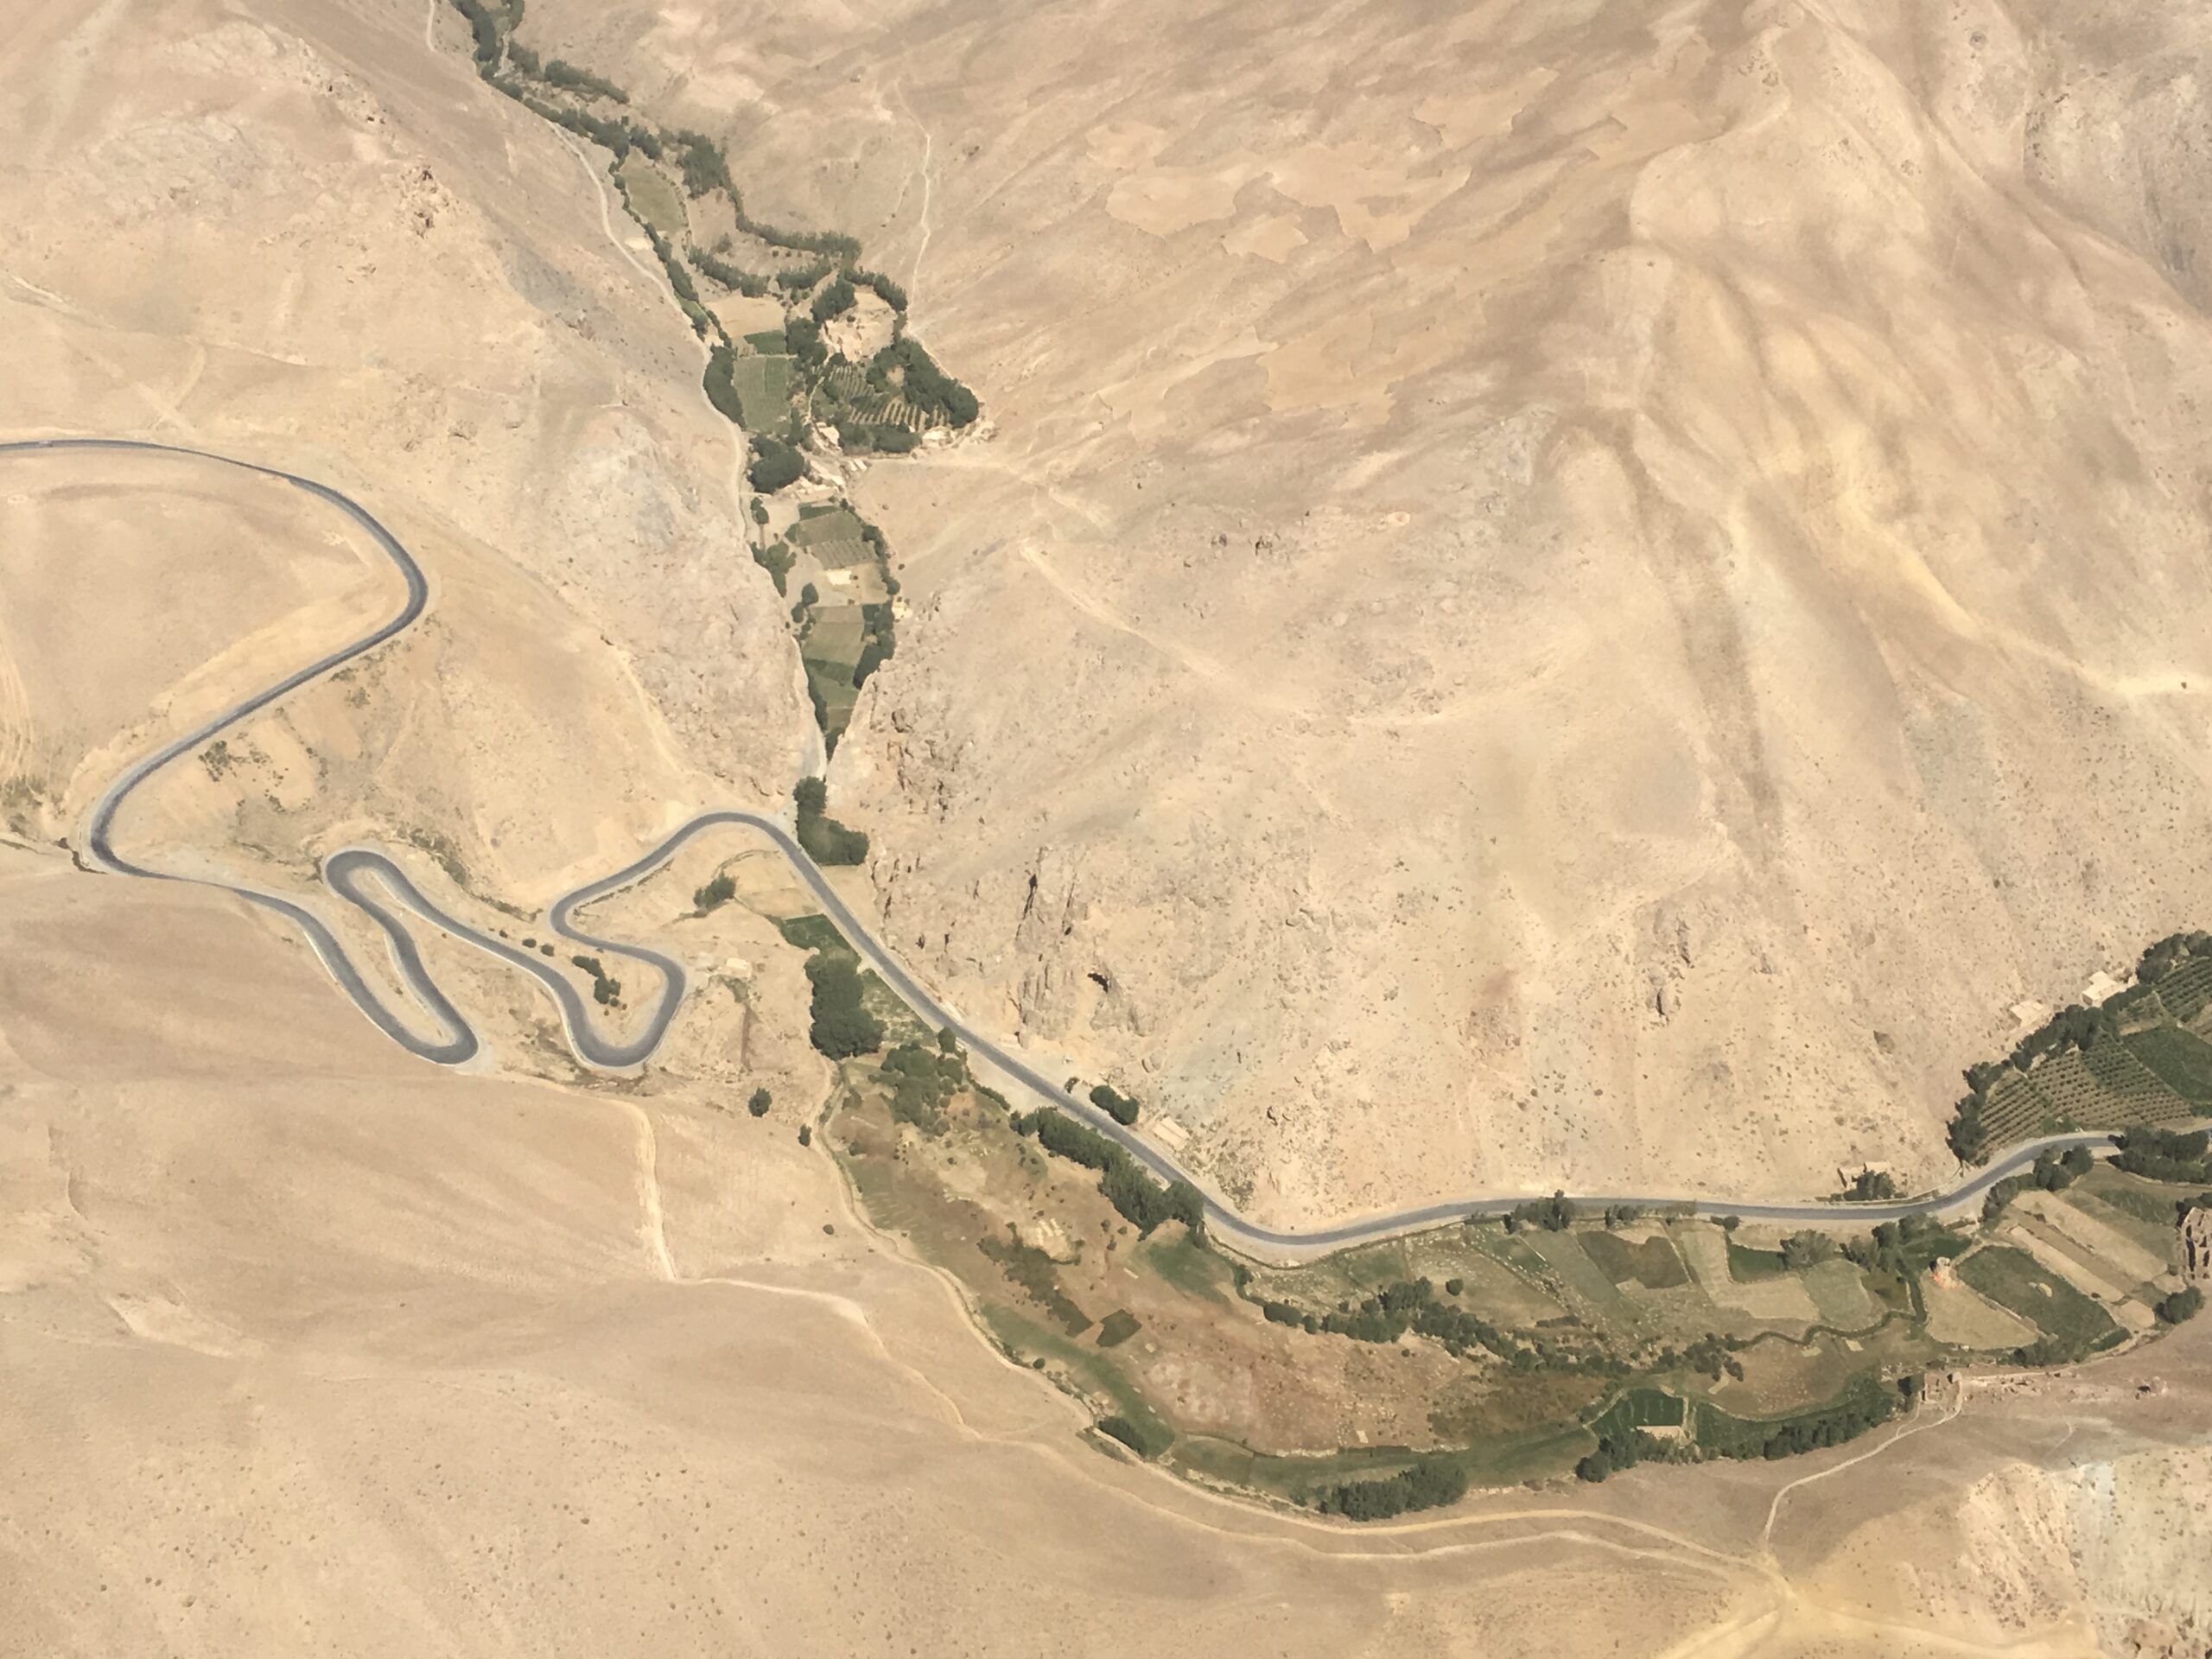 Aerial photography of brown mountains, one road winds through the image.